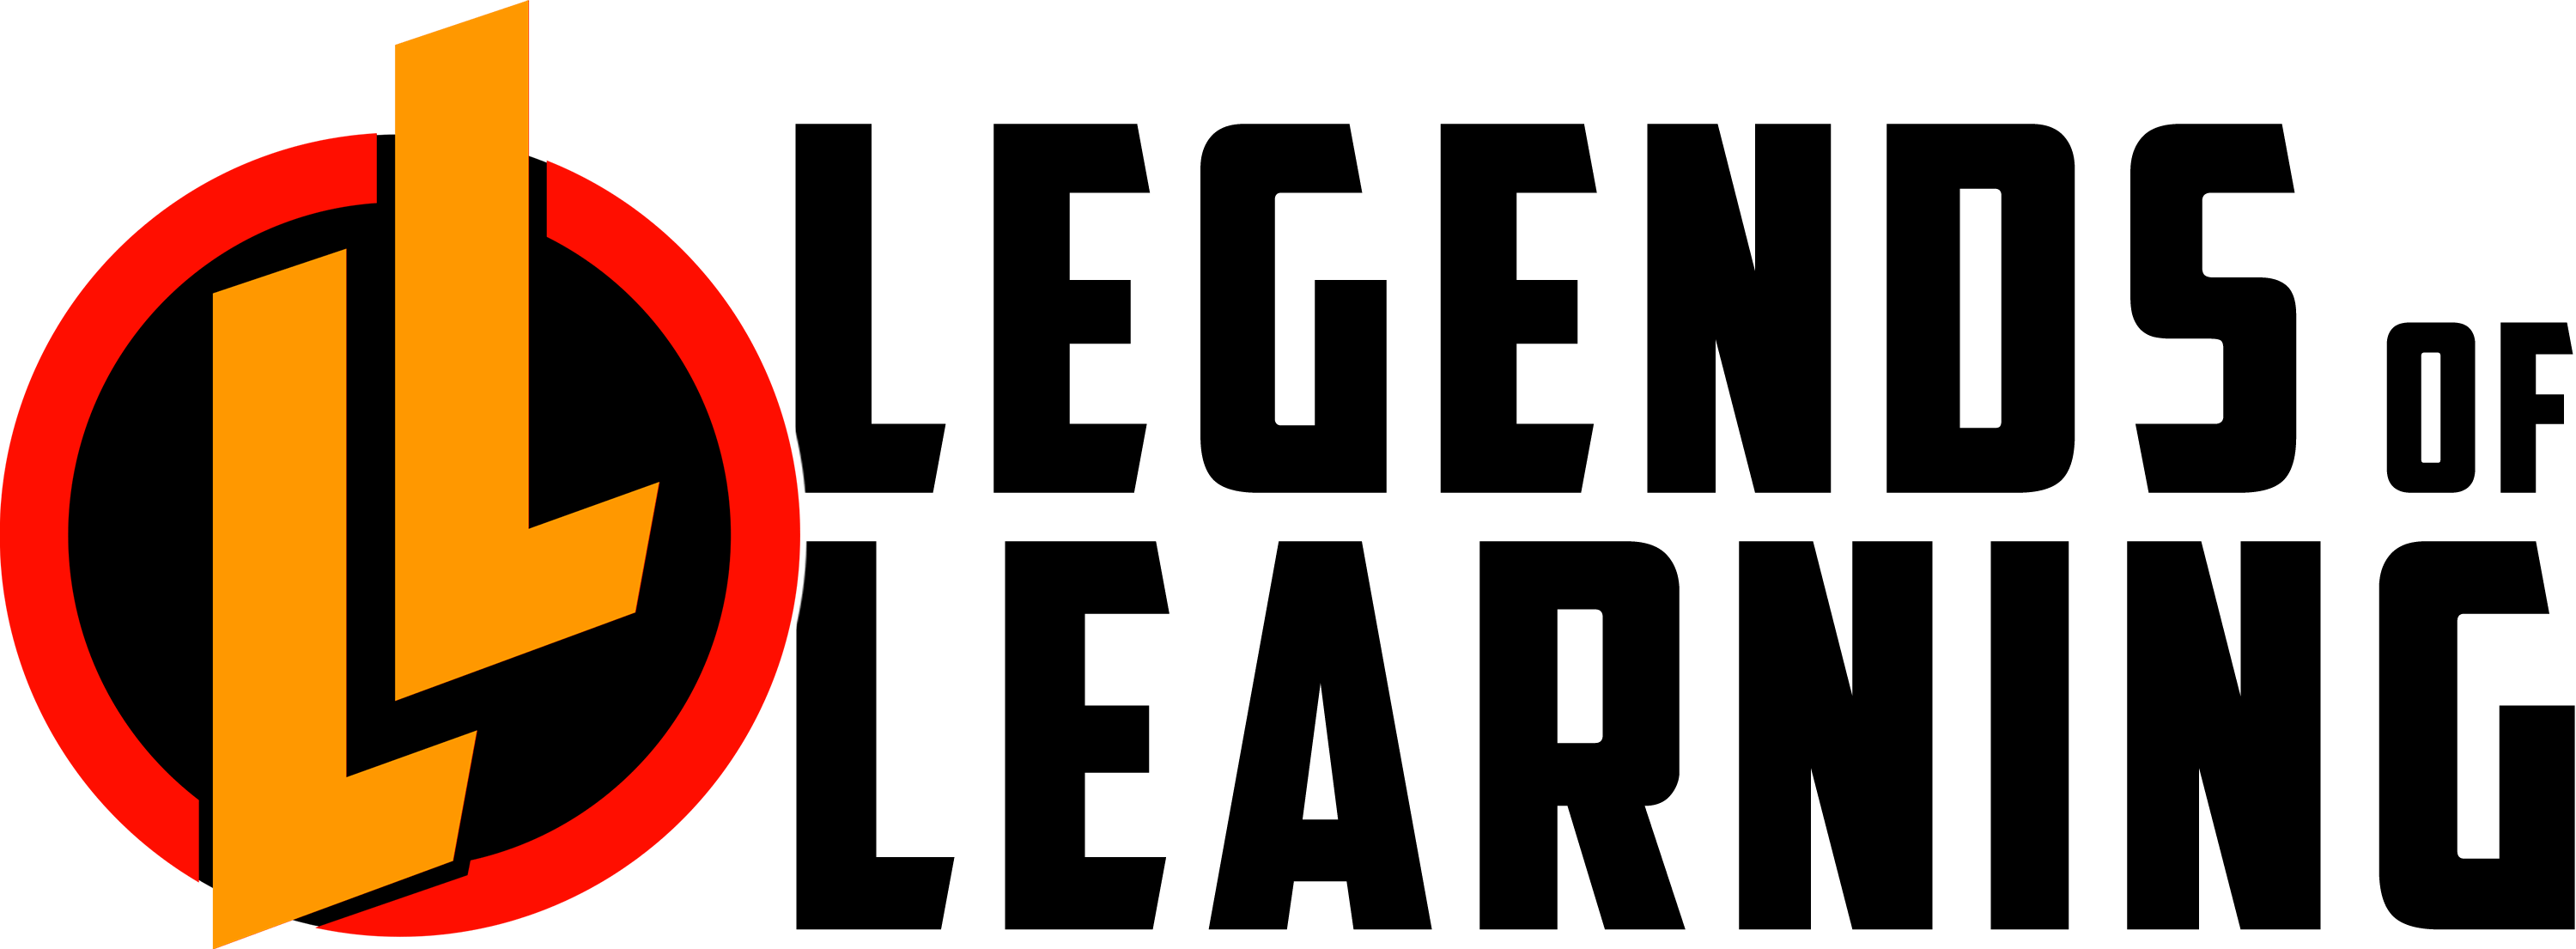 Legends of Learning • GG4L - The Global Grid 4 Learning